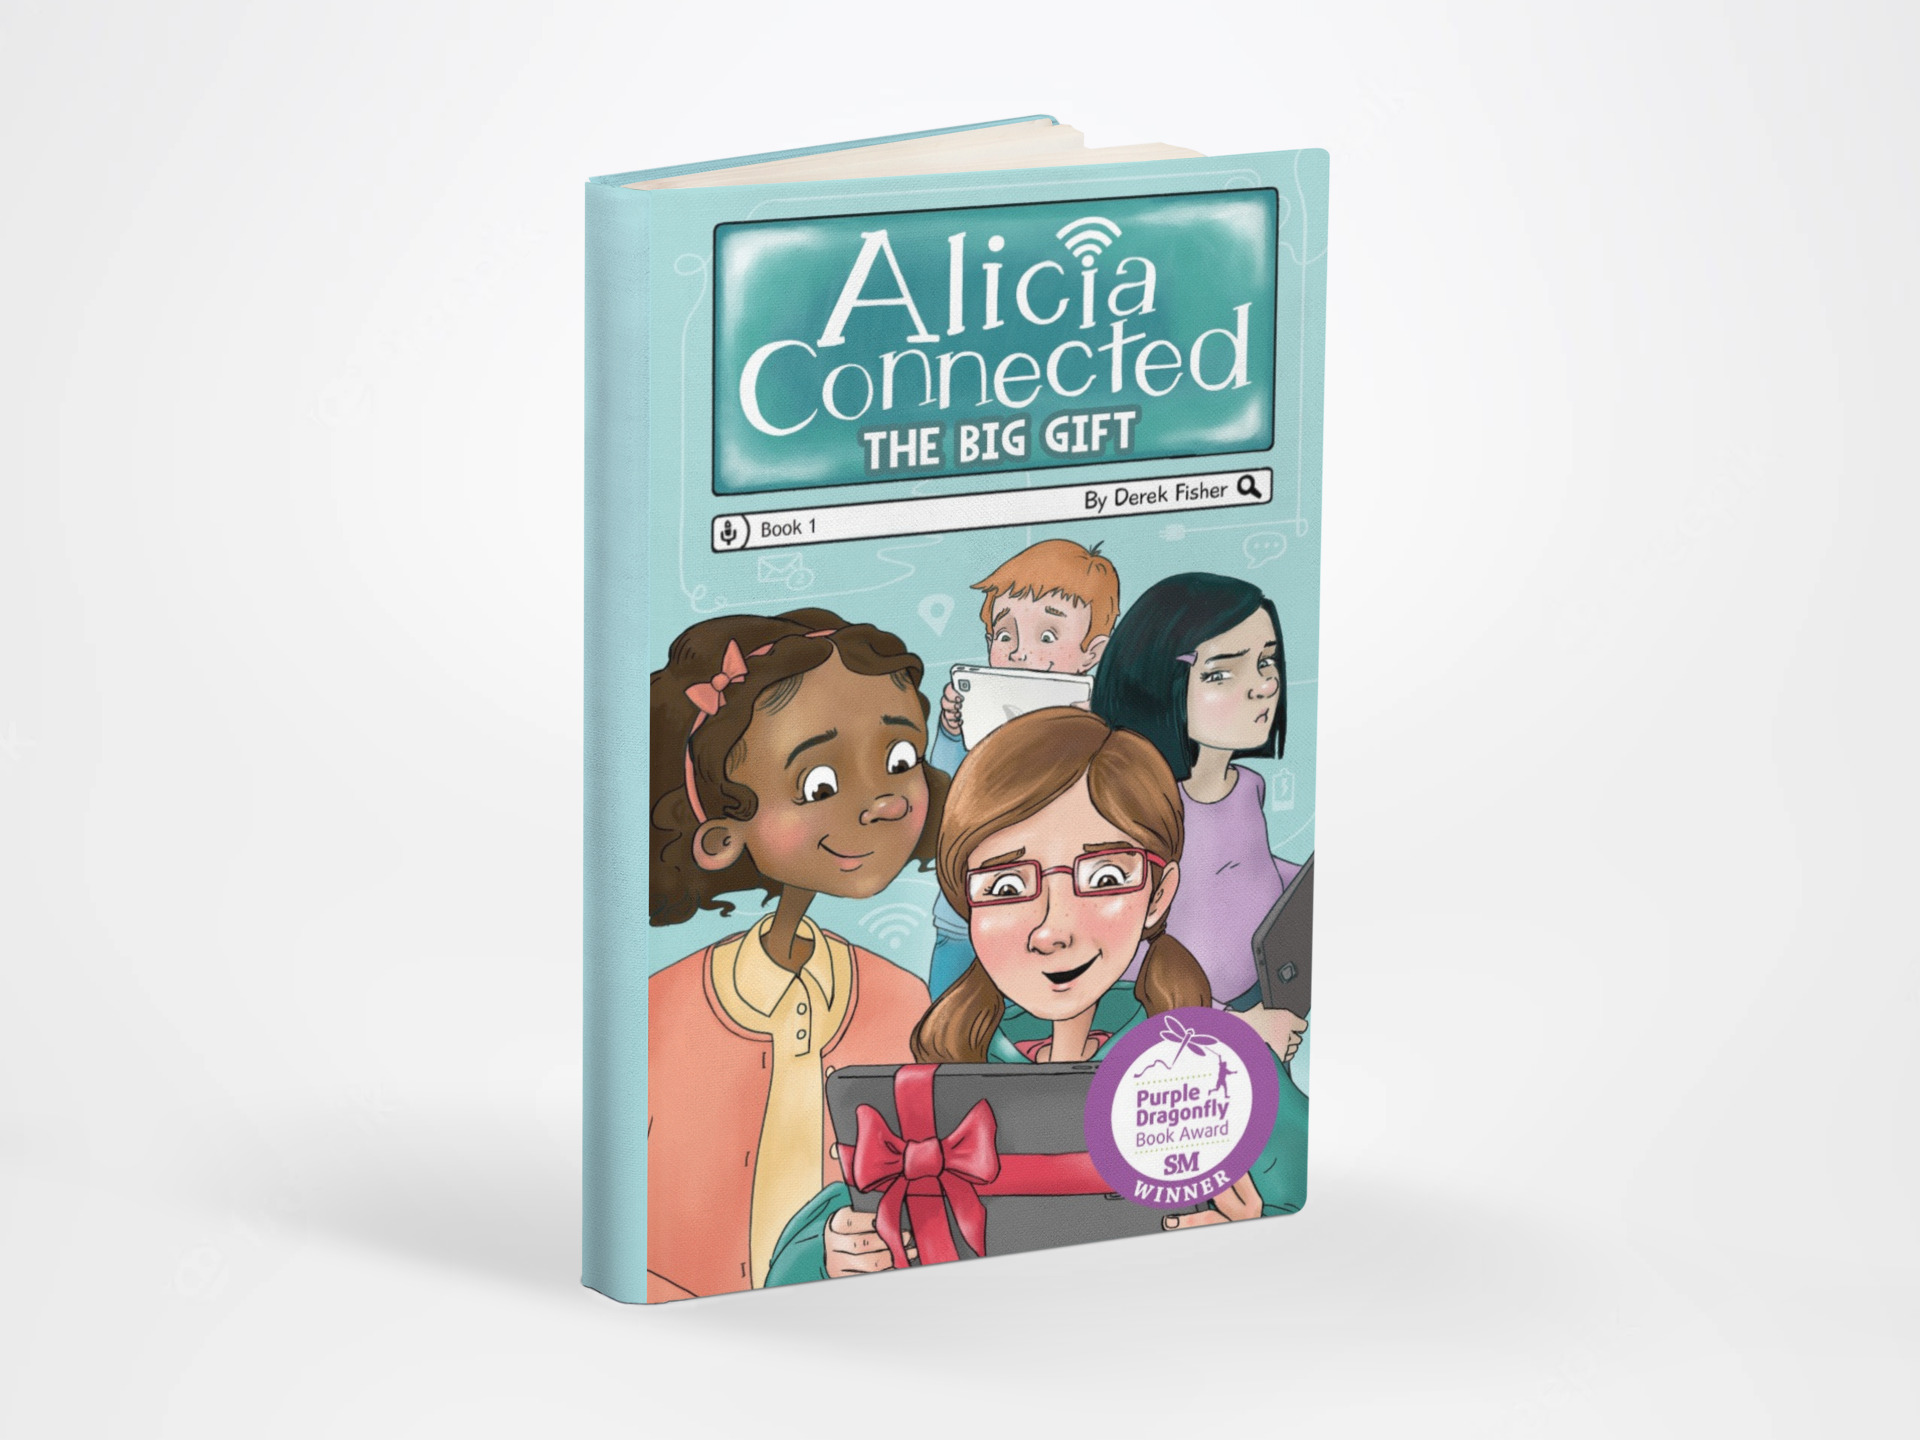 Derek Fisher’s, Alicia Connected Teaches Children How to Use Technology in a Safe and Secure Manner 1